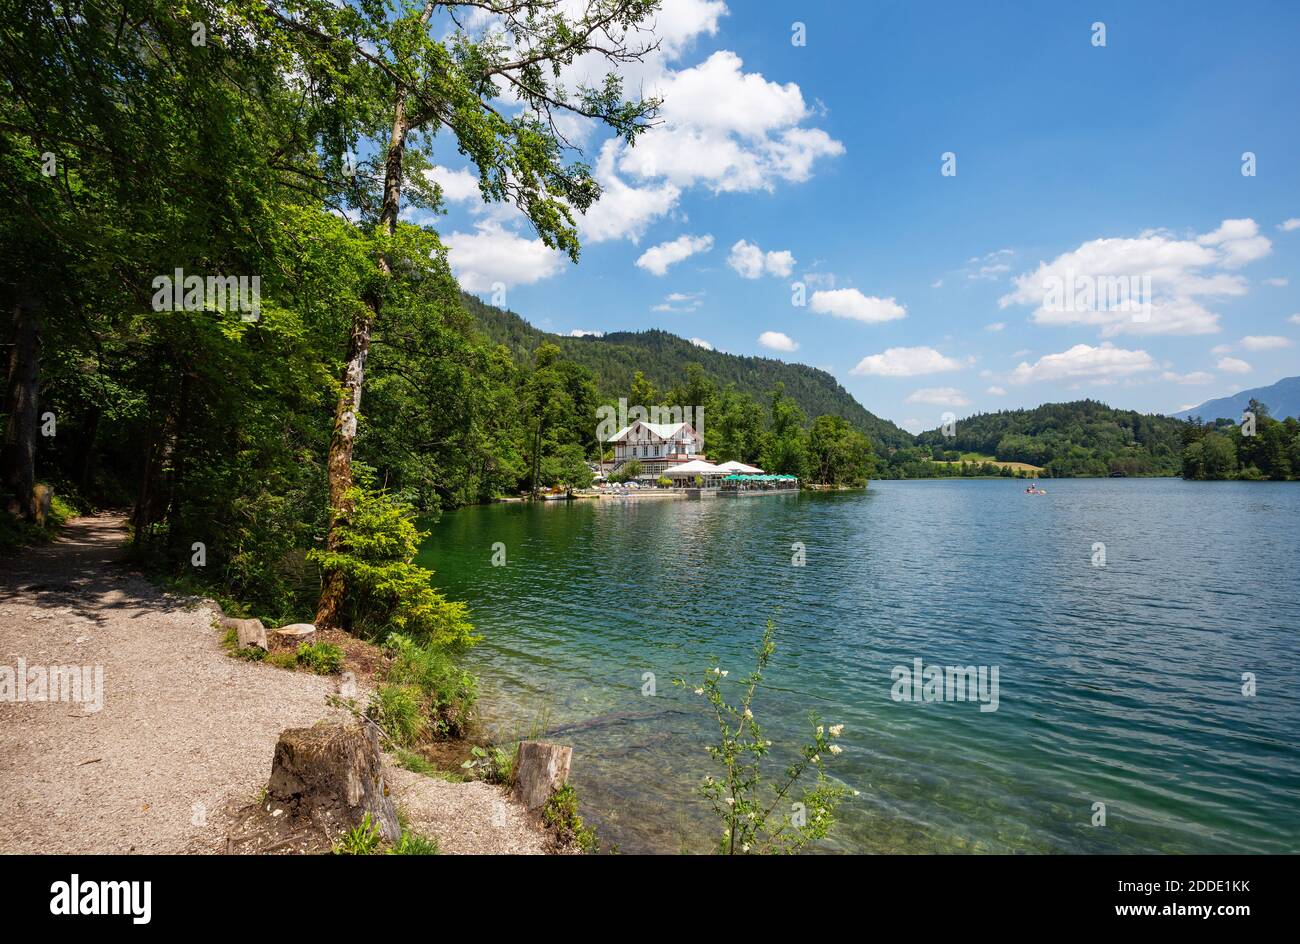 Germany, Bavaria, Bad Reichenhall, Shore of Thumsee lake in summer with restaurant in background Stock Photo